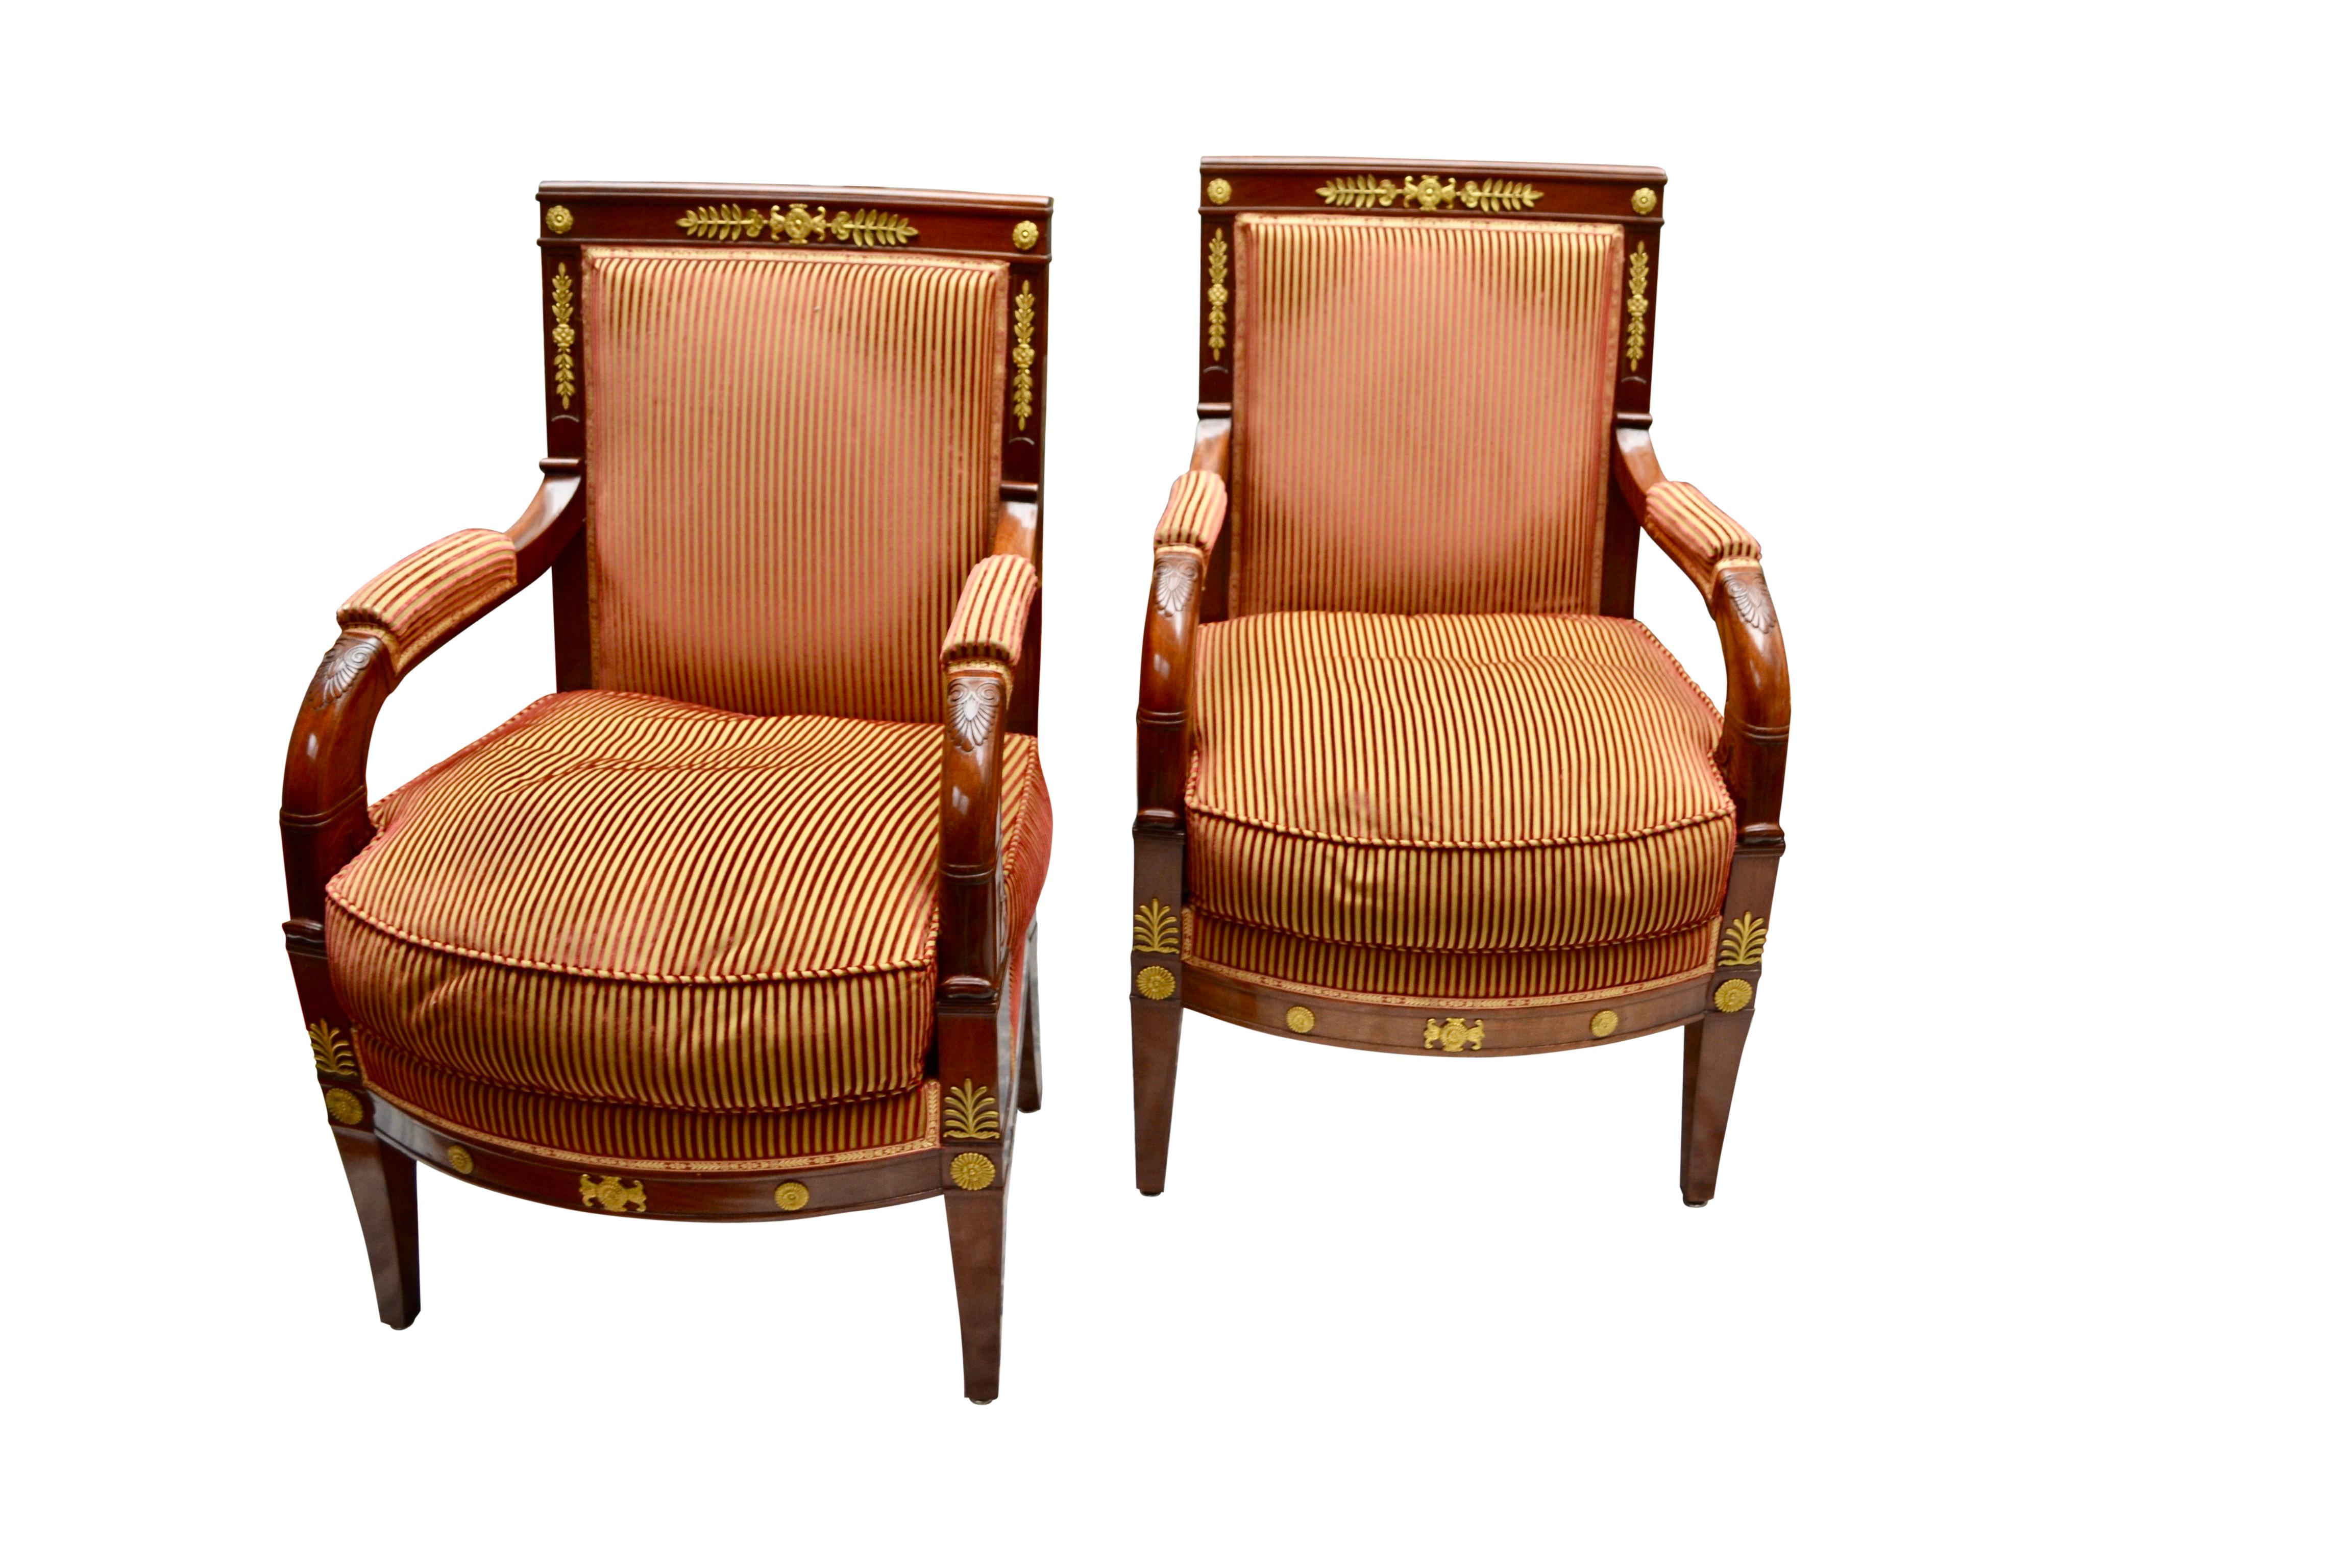 A pair of French Empire mahogany fauteuils or armchairs 'a la Reine' in the manner of Jacob-Desmalter. The carved chair frames are in Honduran mahogany; the sloped padded open arms are carved with anthemions and continue into straight front legs;